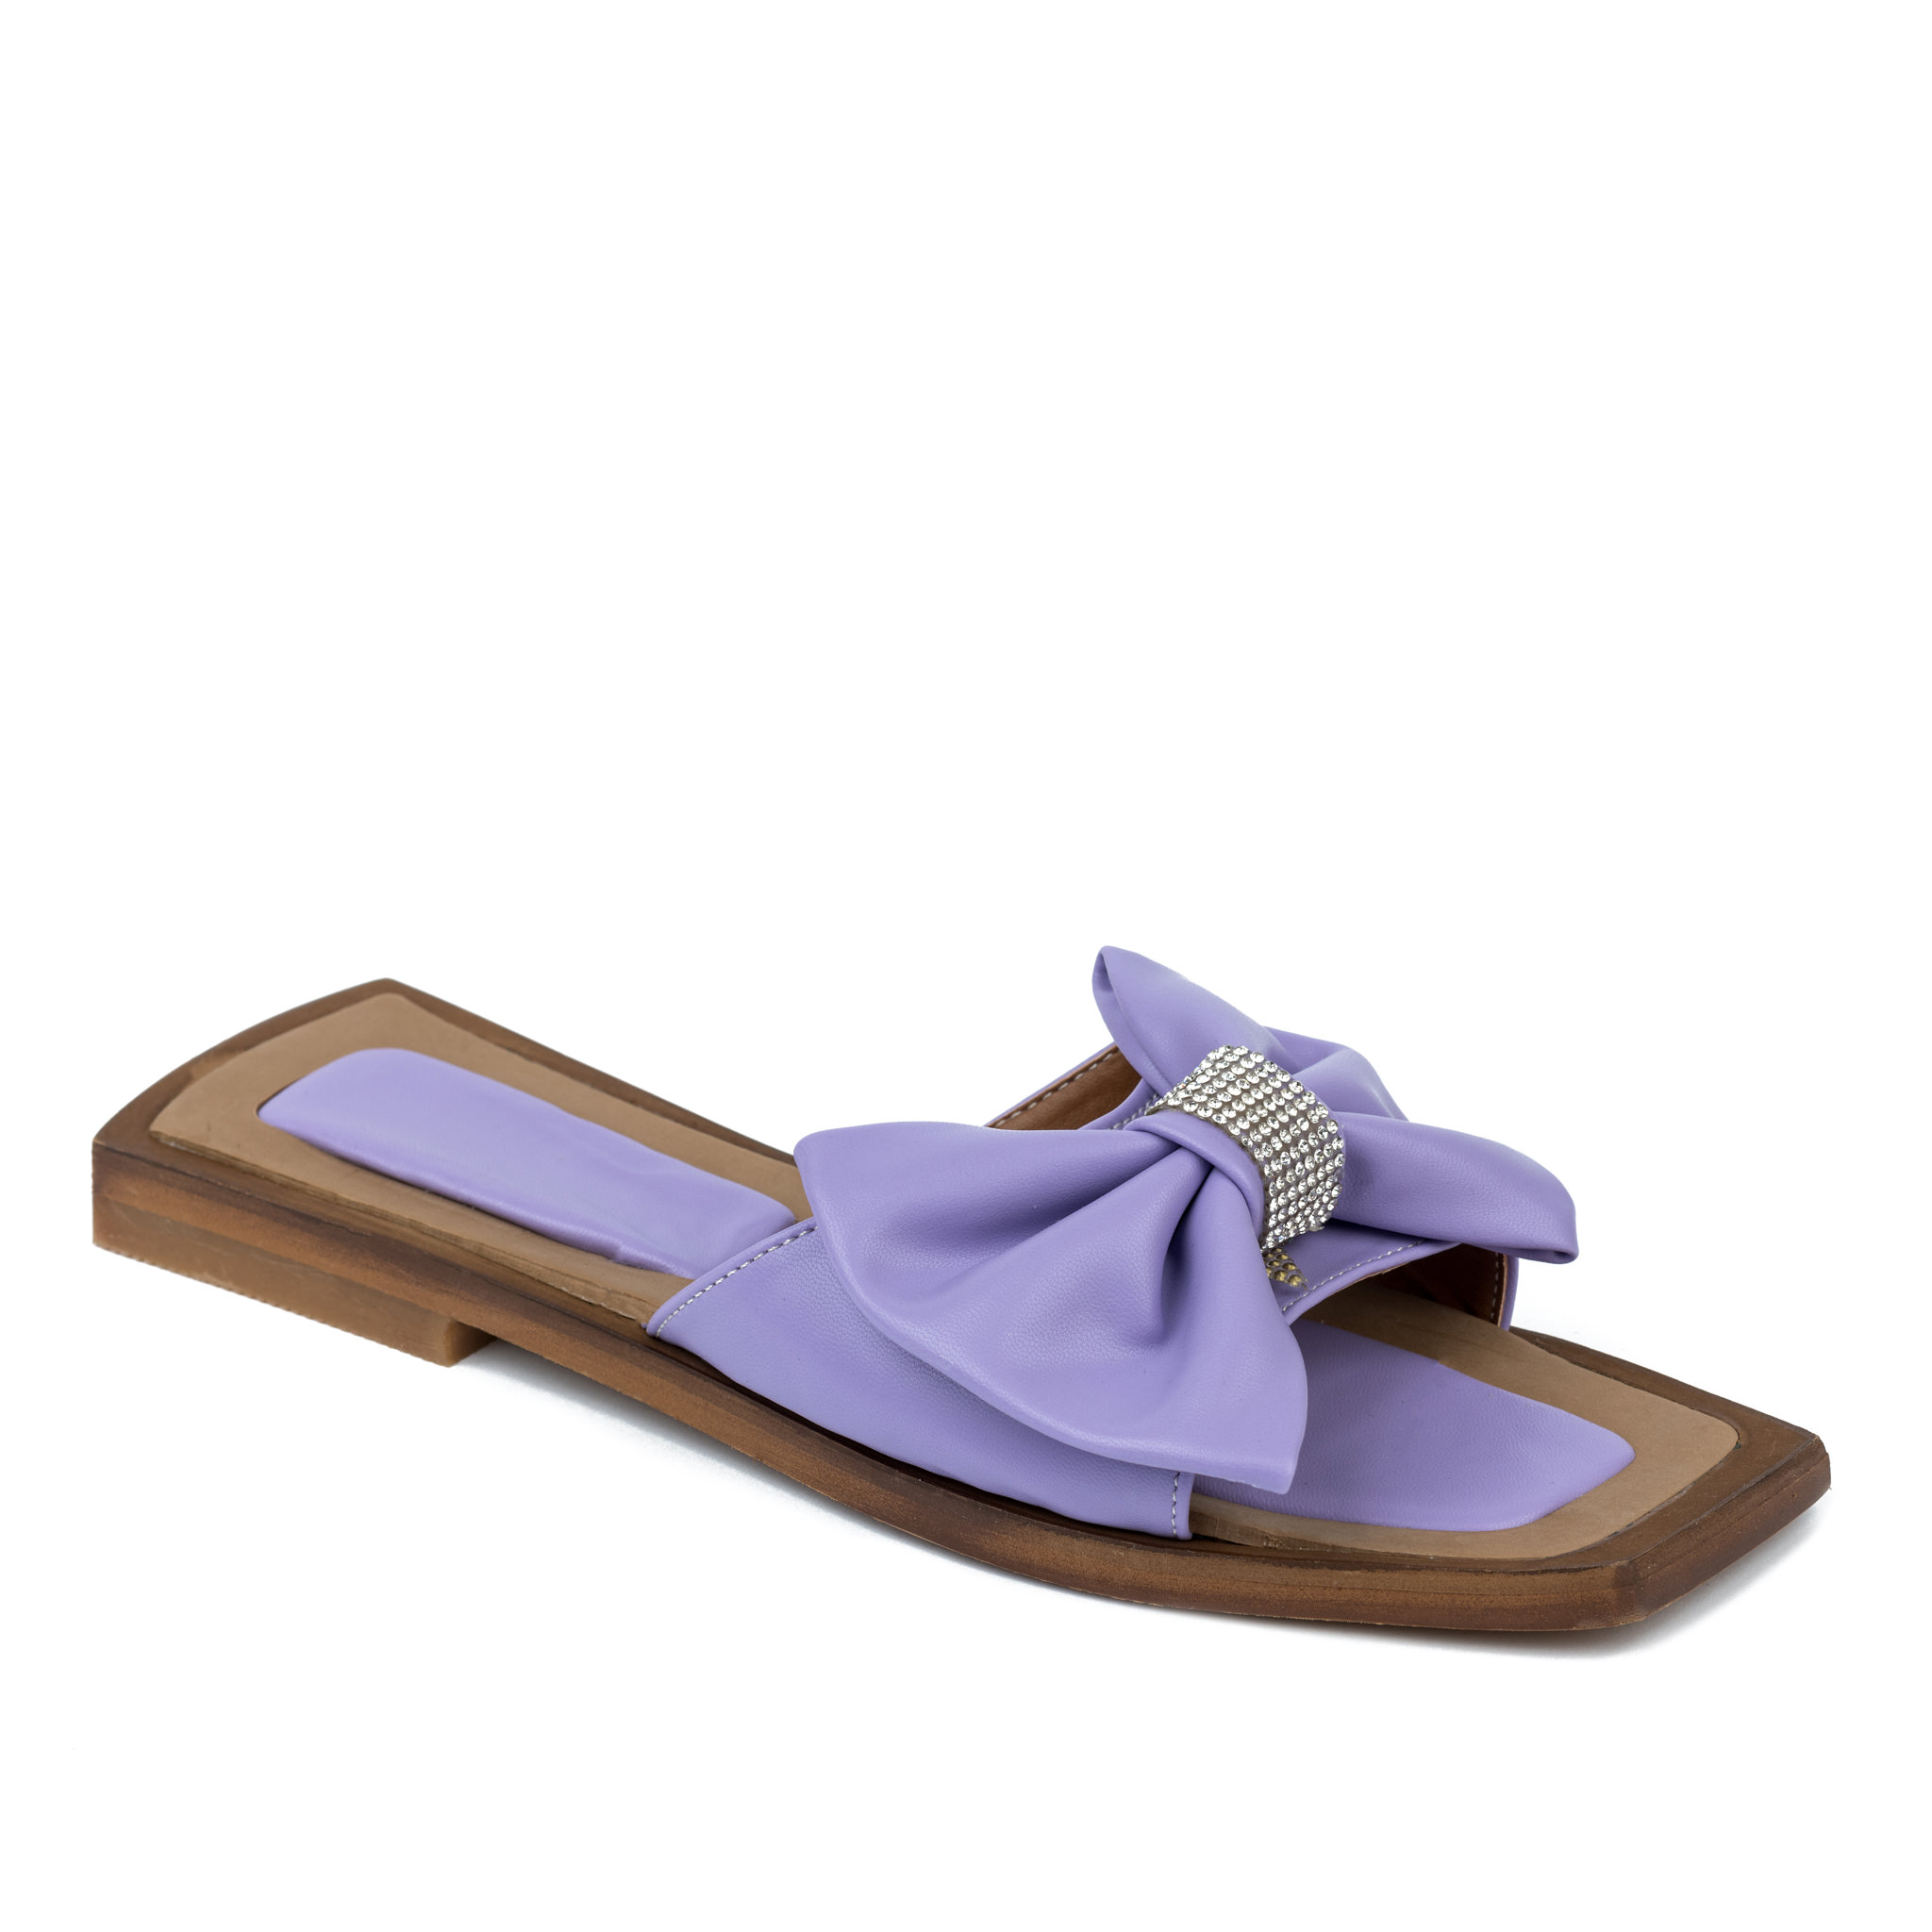 Women Slippers and Mules A422 - VIOLET